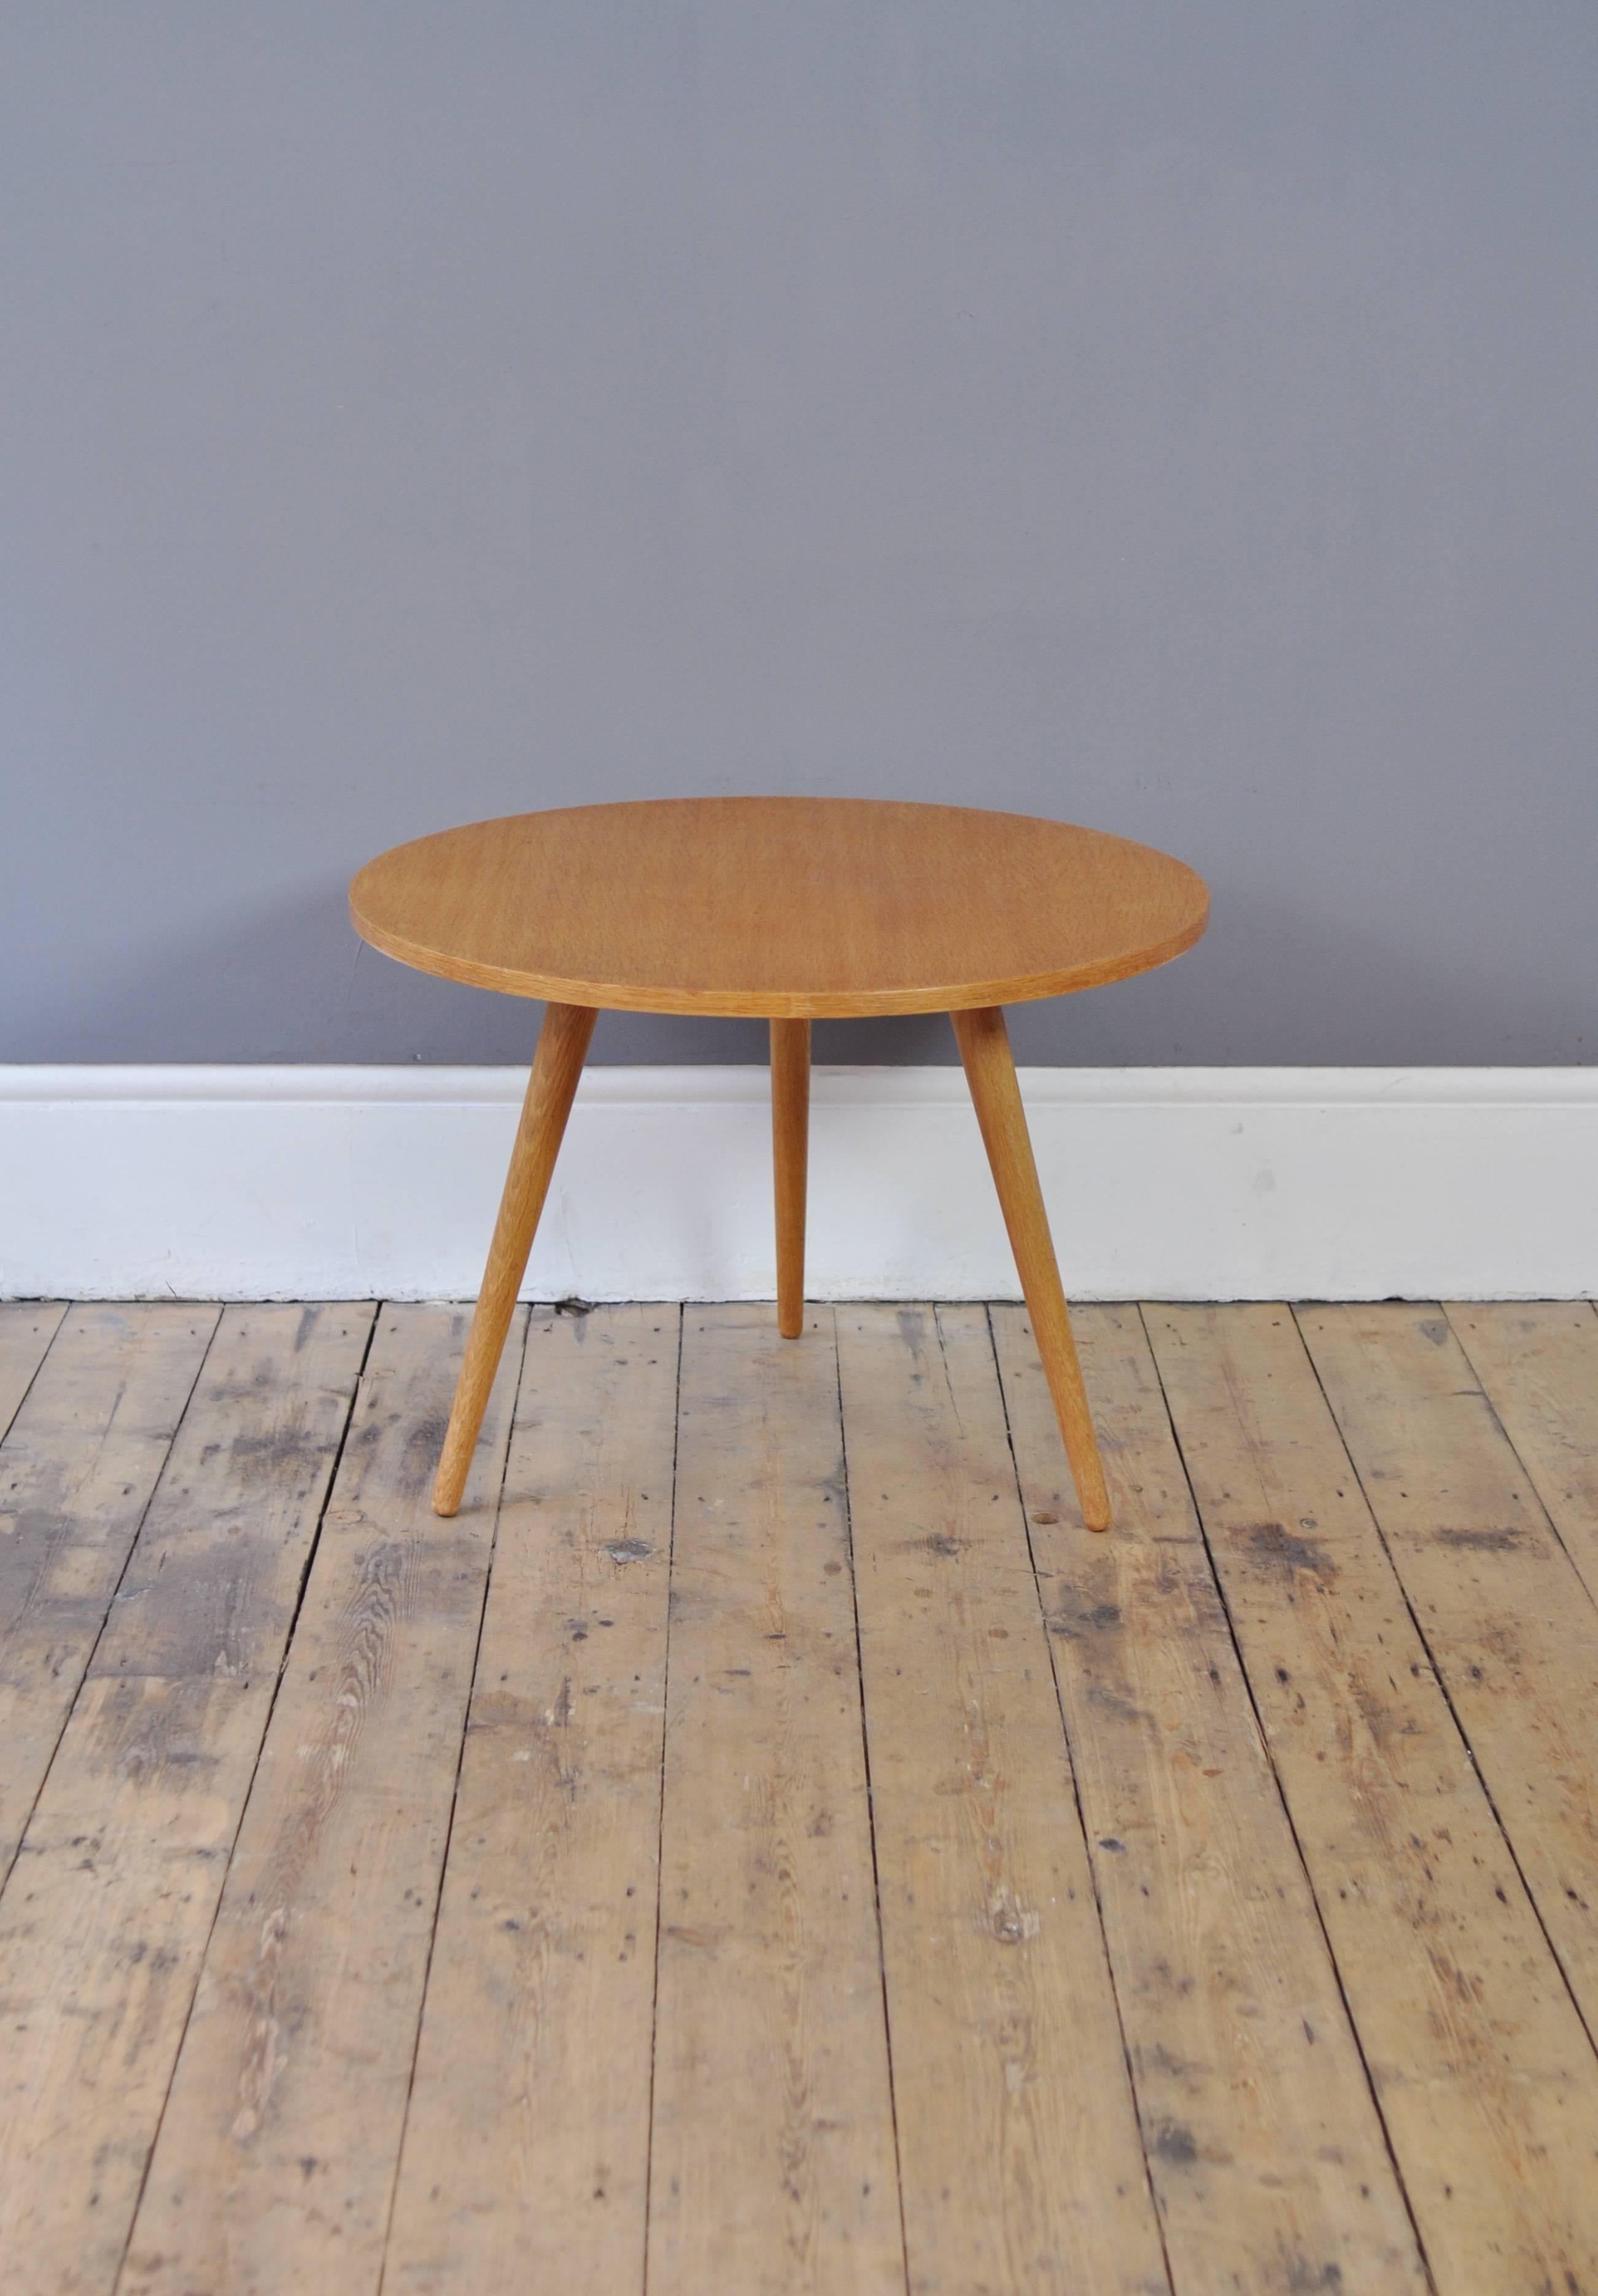 1960s round oak coffee table with standout looks provided by the light toned wood and distinctive tripod legs.